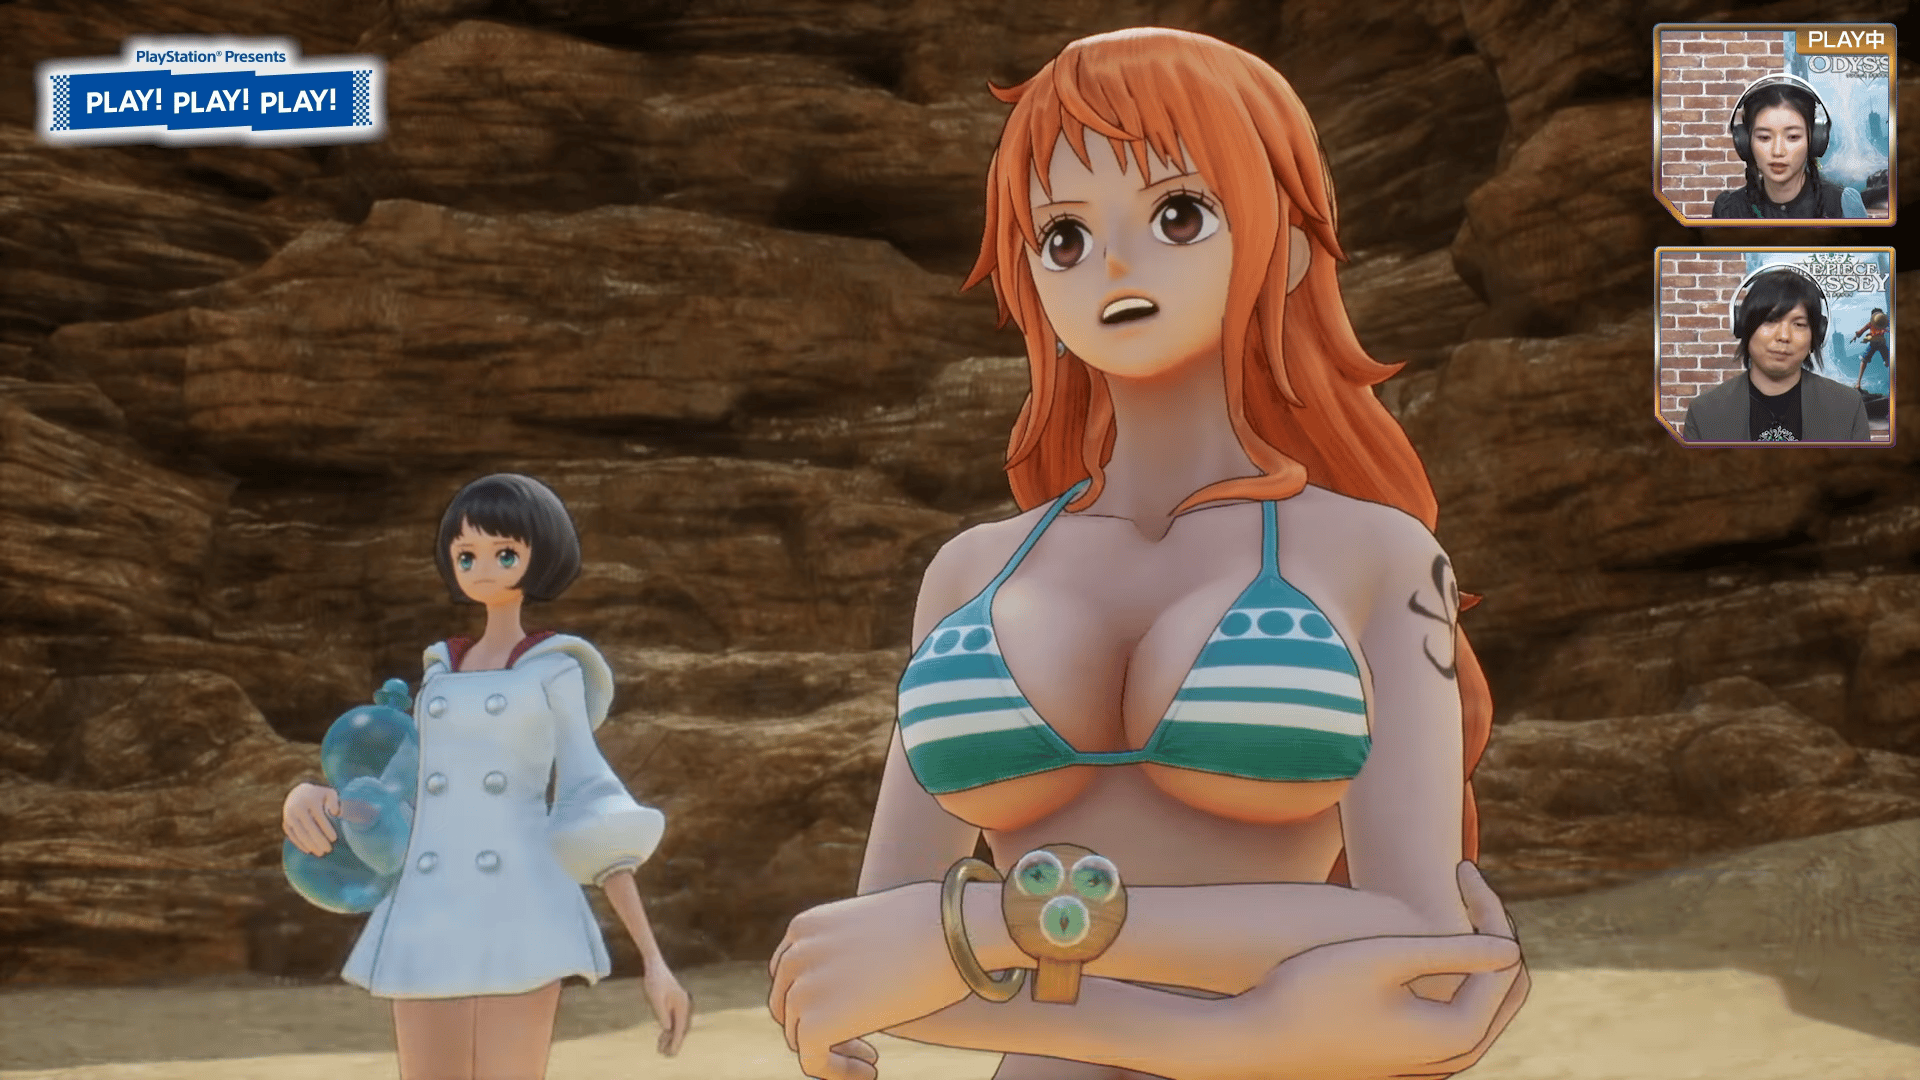 One Piece Odyssey Shares 14 Minutes of Gameplay Featuring Producer; Town Exploration